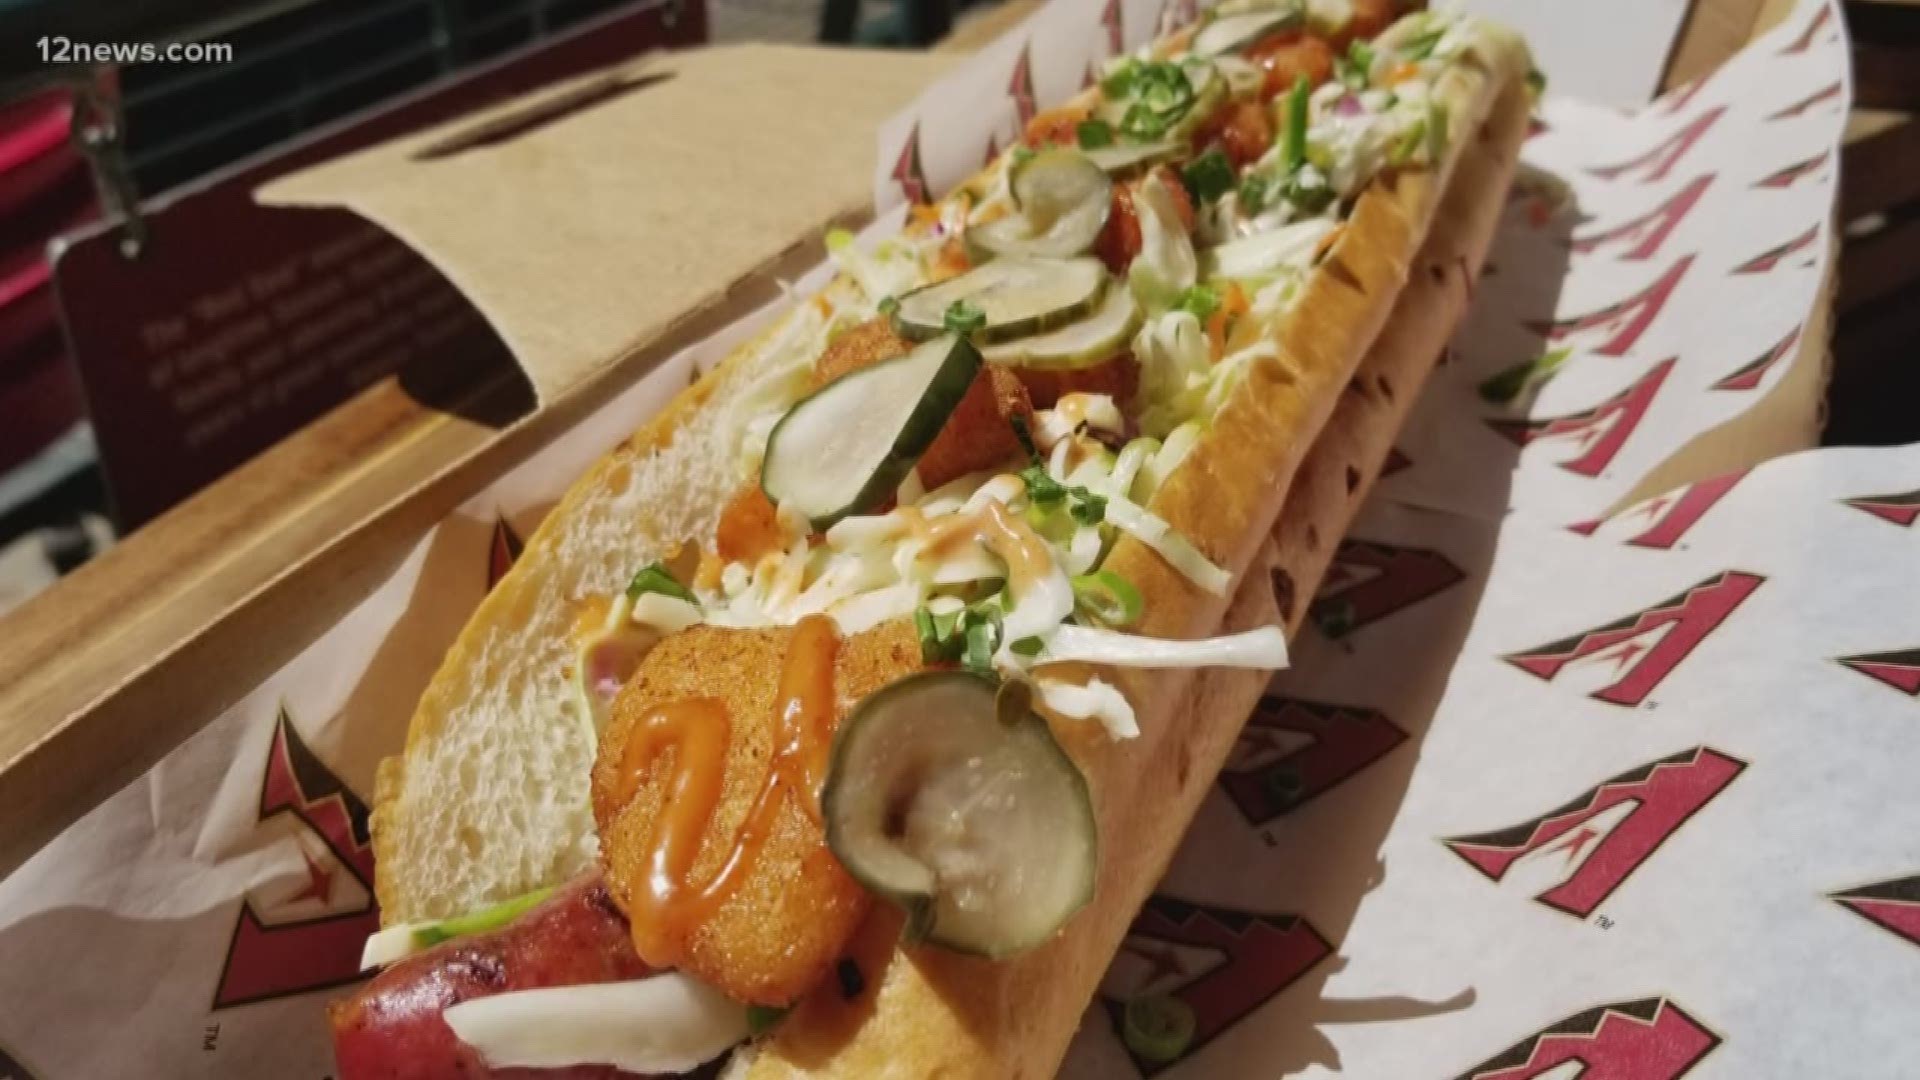 From new tasty treats to new, organic astroturf, the Diamondbacks are rolling out a host of new features to make your game day experience that much more enjoyable. We got a sneak peak at and so can you!